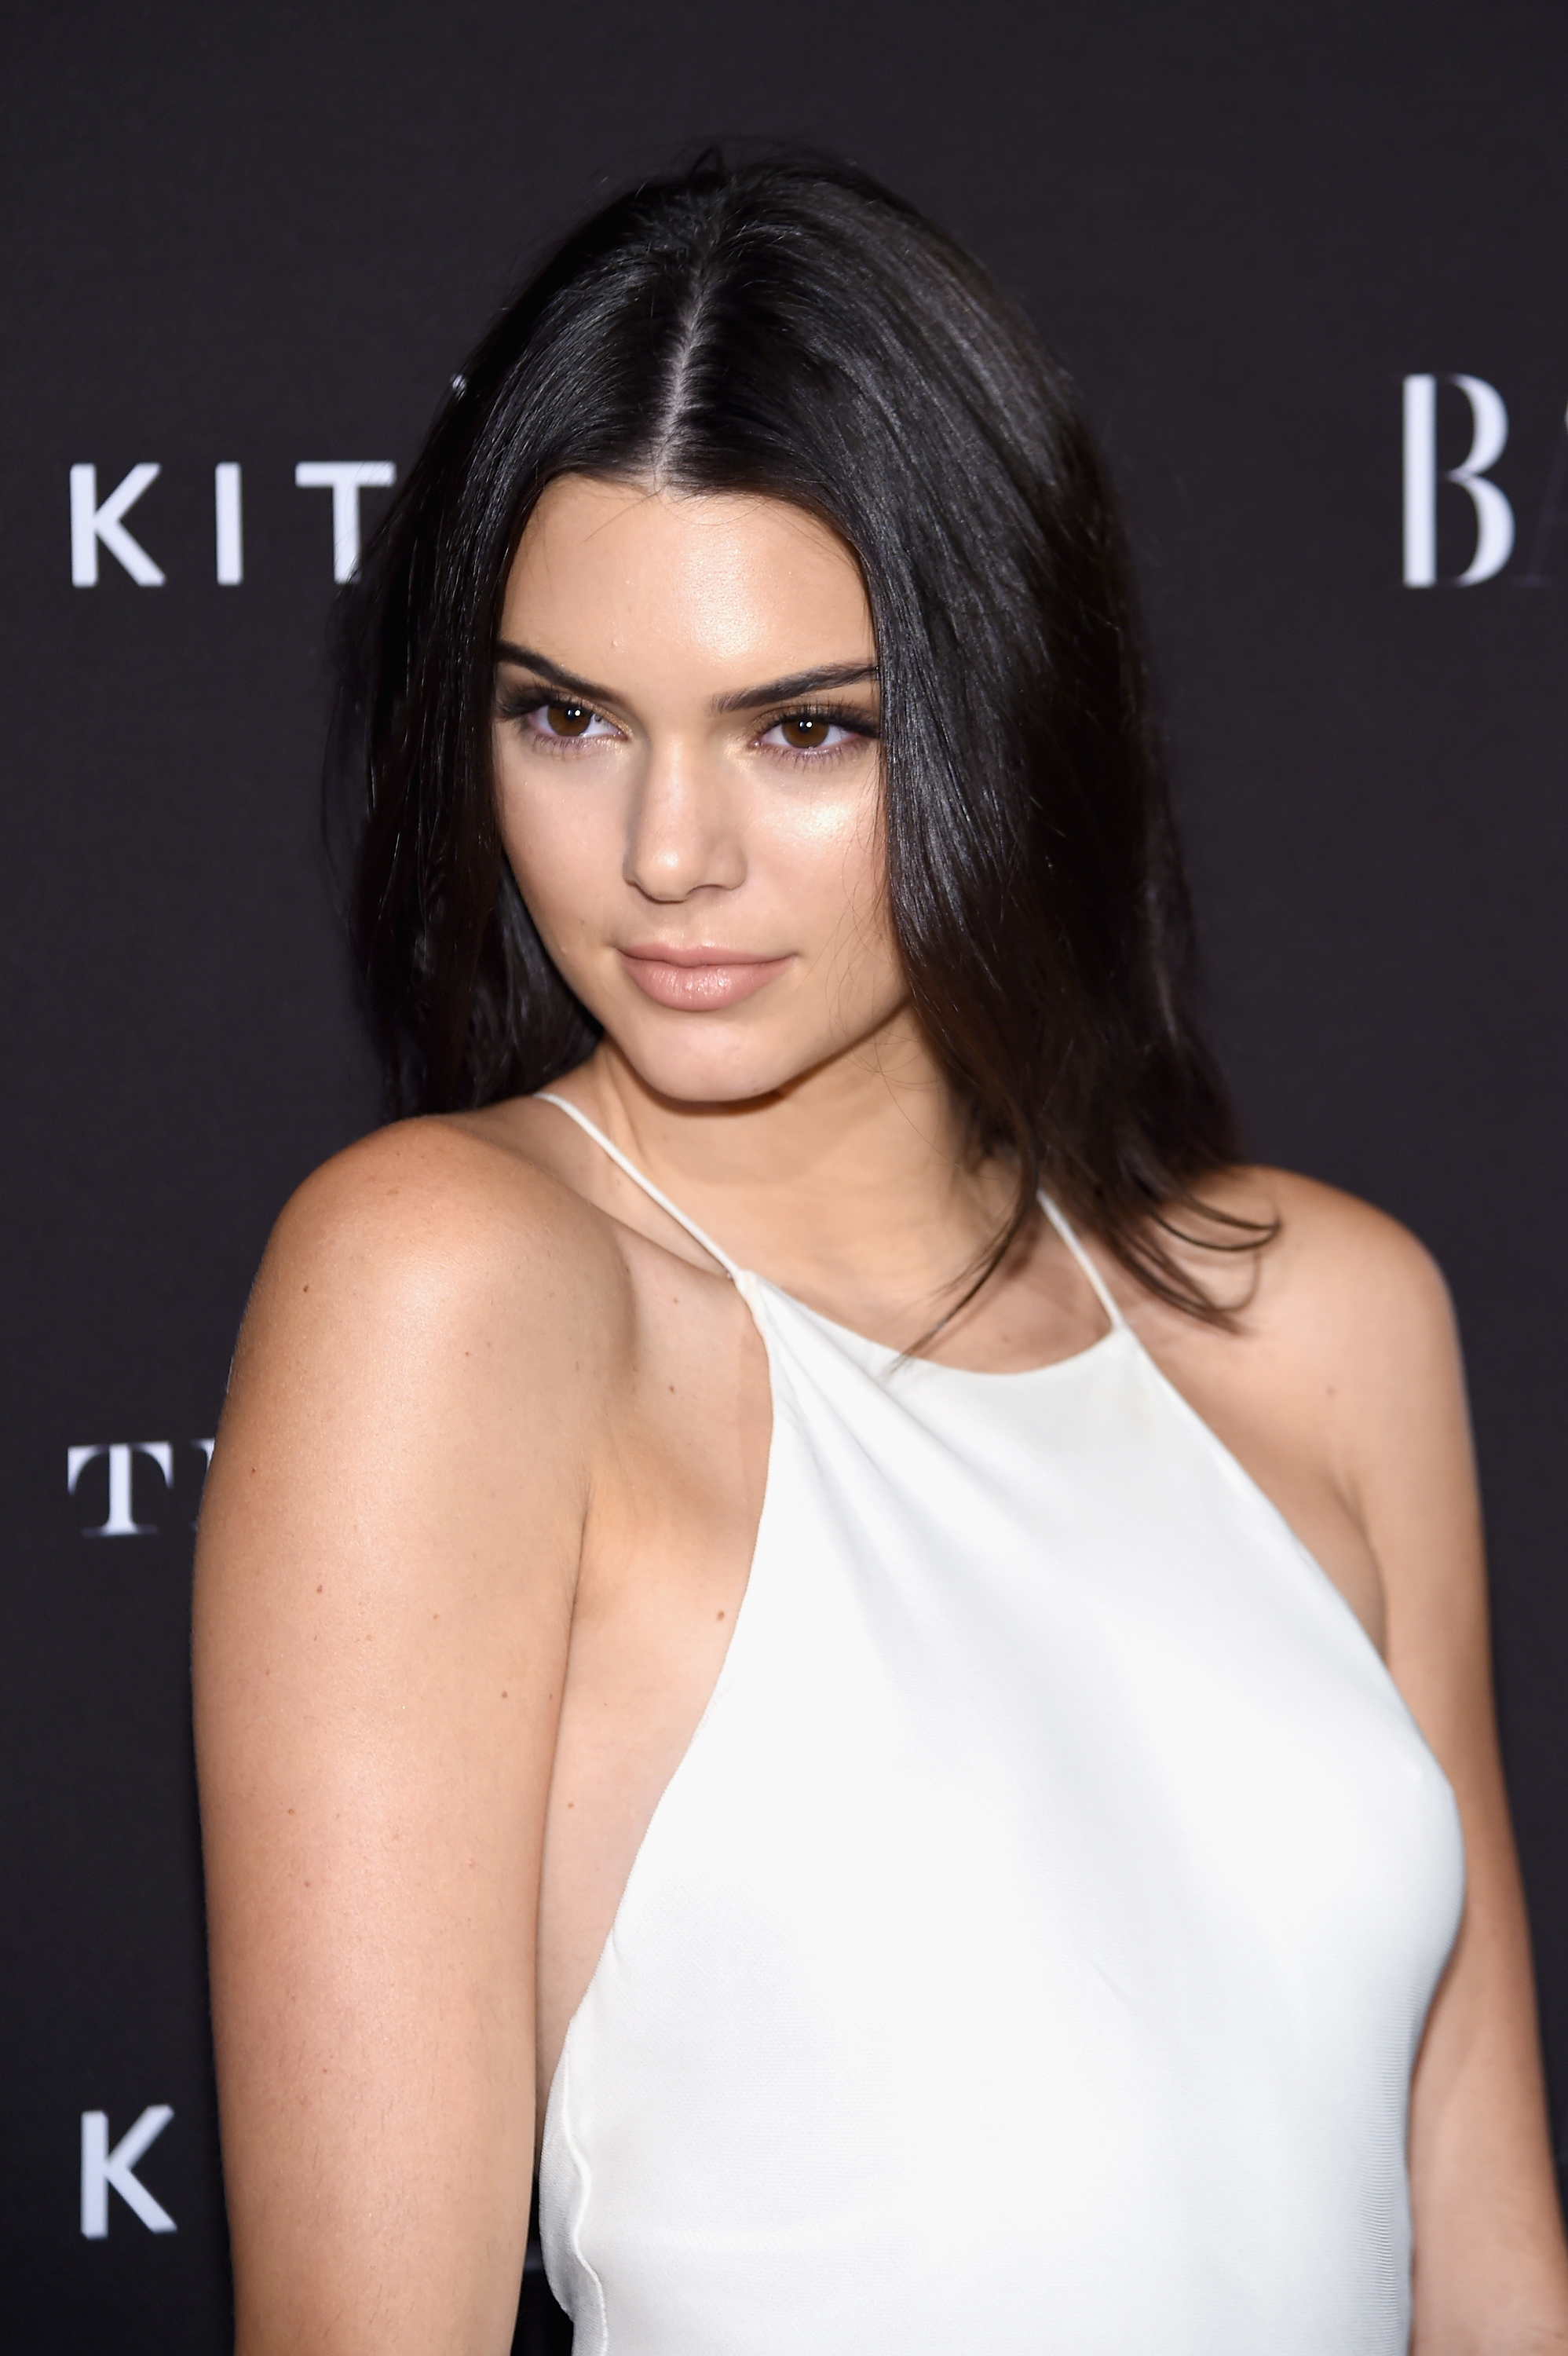 NEW YORK, NY - SEPTEMBER 16: Kendall Jenner attends the 2015 Harper's BAZAAR ICONS Event at The Plaza Hotel on September 16, 2015 in New York City. (Photo by Jamie McCarthy/Getty Images)